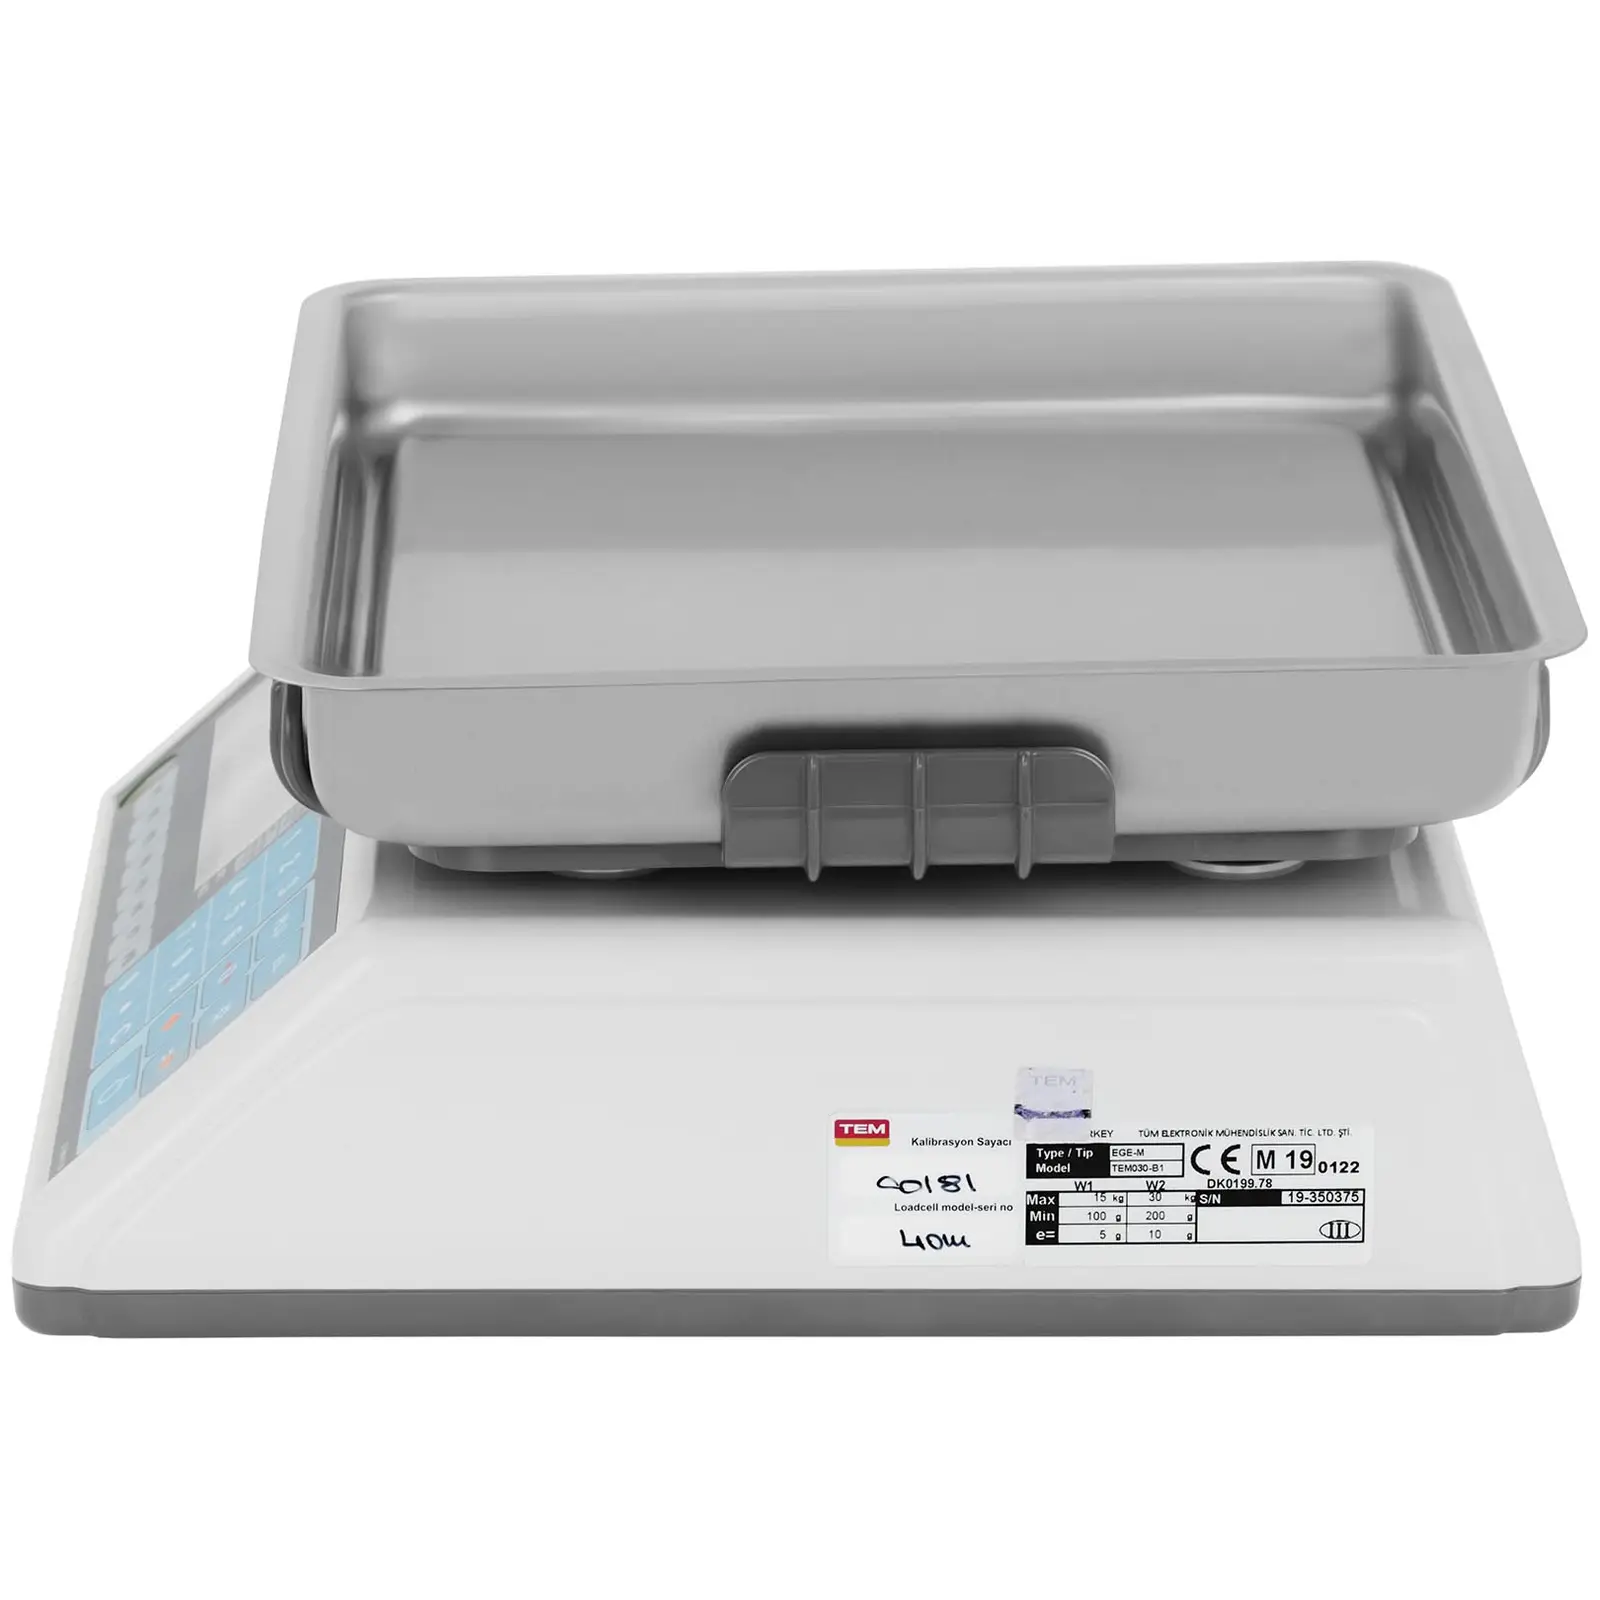 Price Counting Scale - calibrated - 30 kg / 10 g - dual LCD